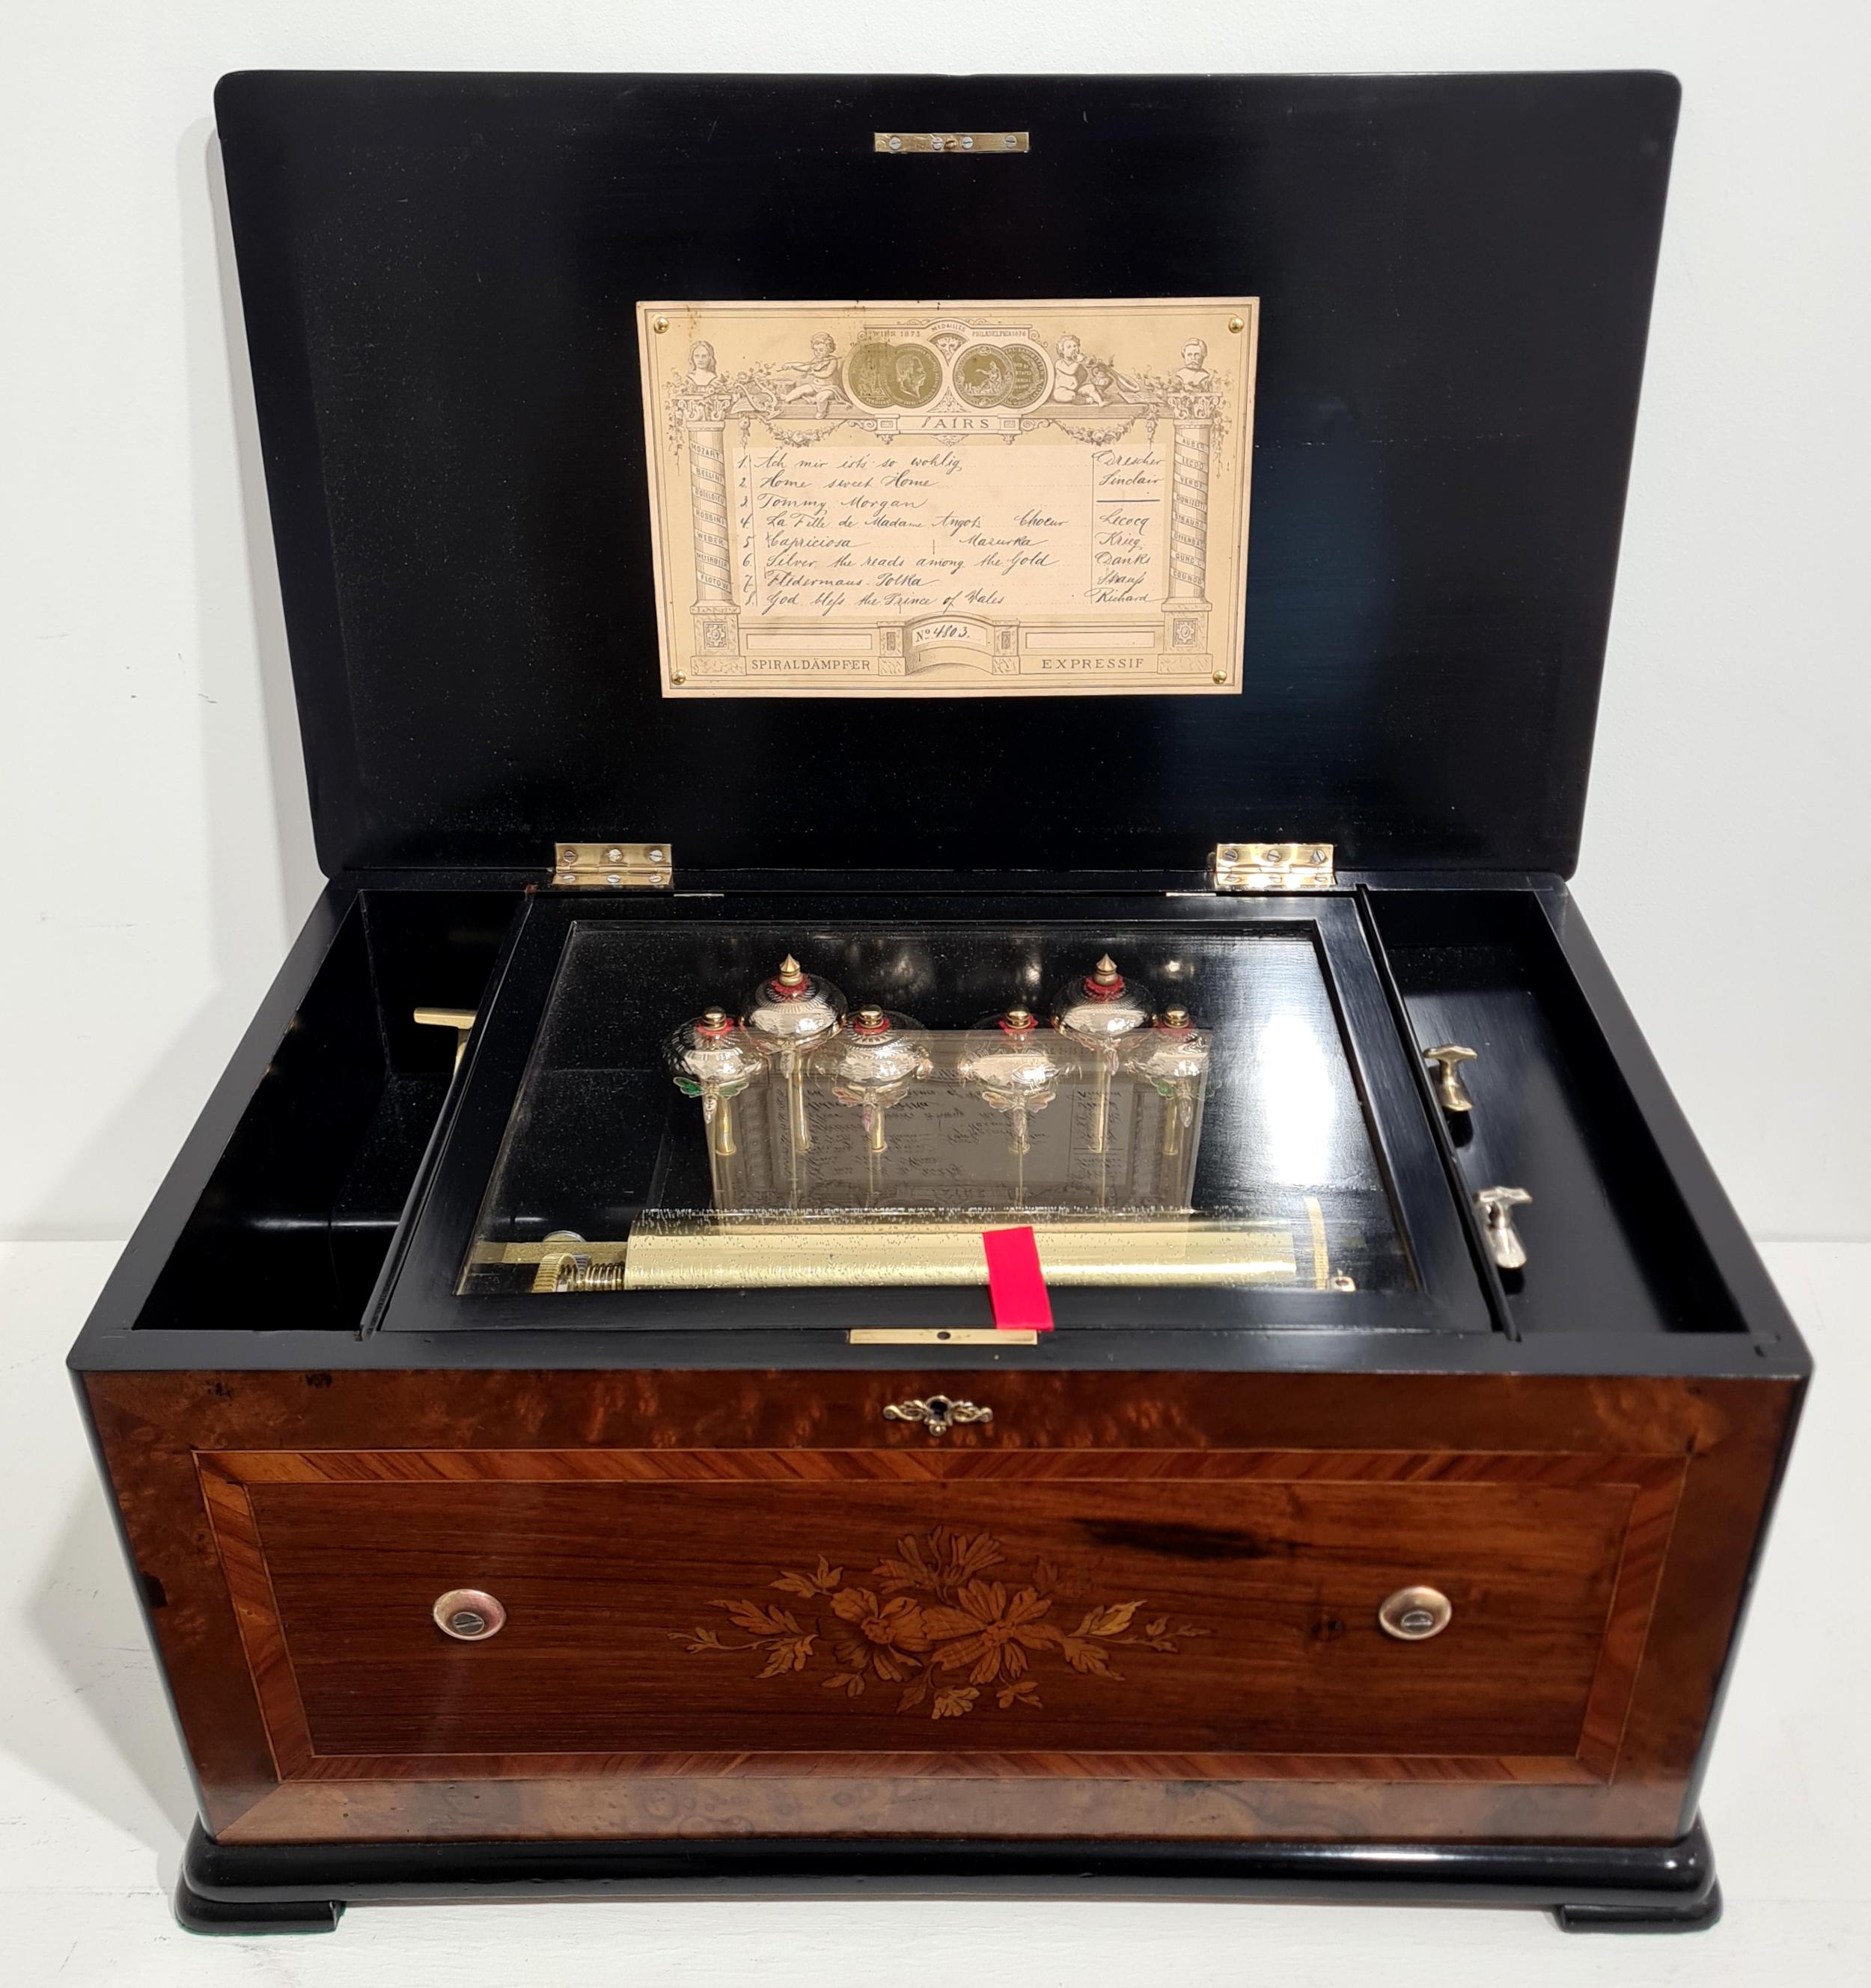 A lovely quality antique music box made by Karrer of Geneva, Switzerland in c. 1875. 
The fully serviced musical movement features a highly attractive arrangement of 6 individually engraved bells struck by colourful enamel bee strikers. 
It plays a